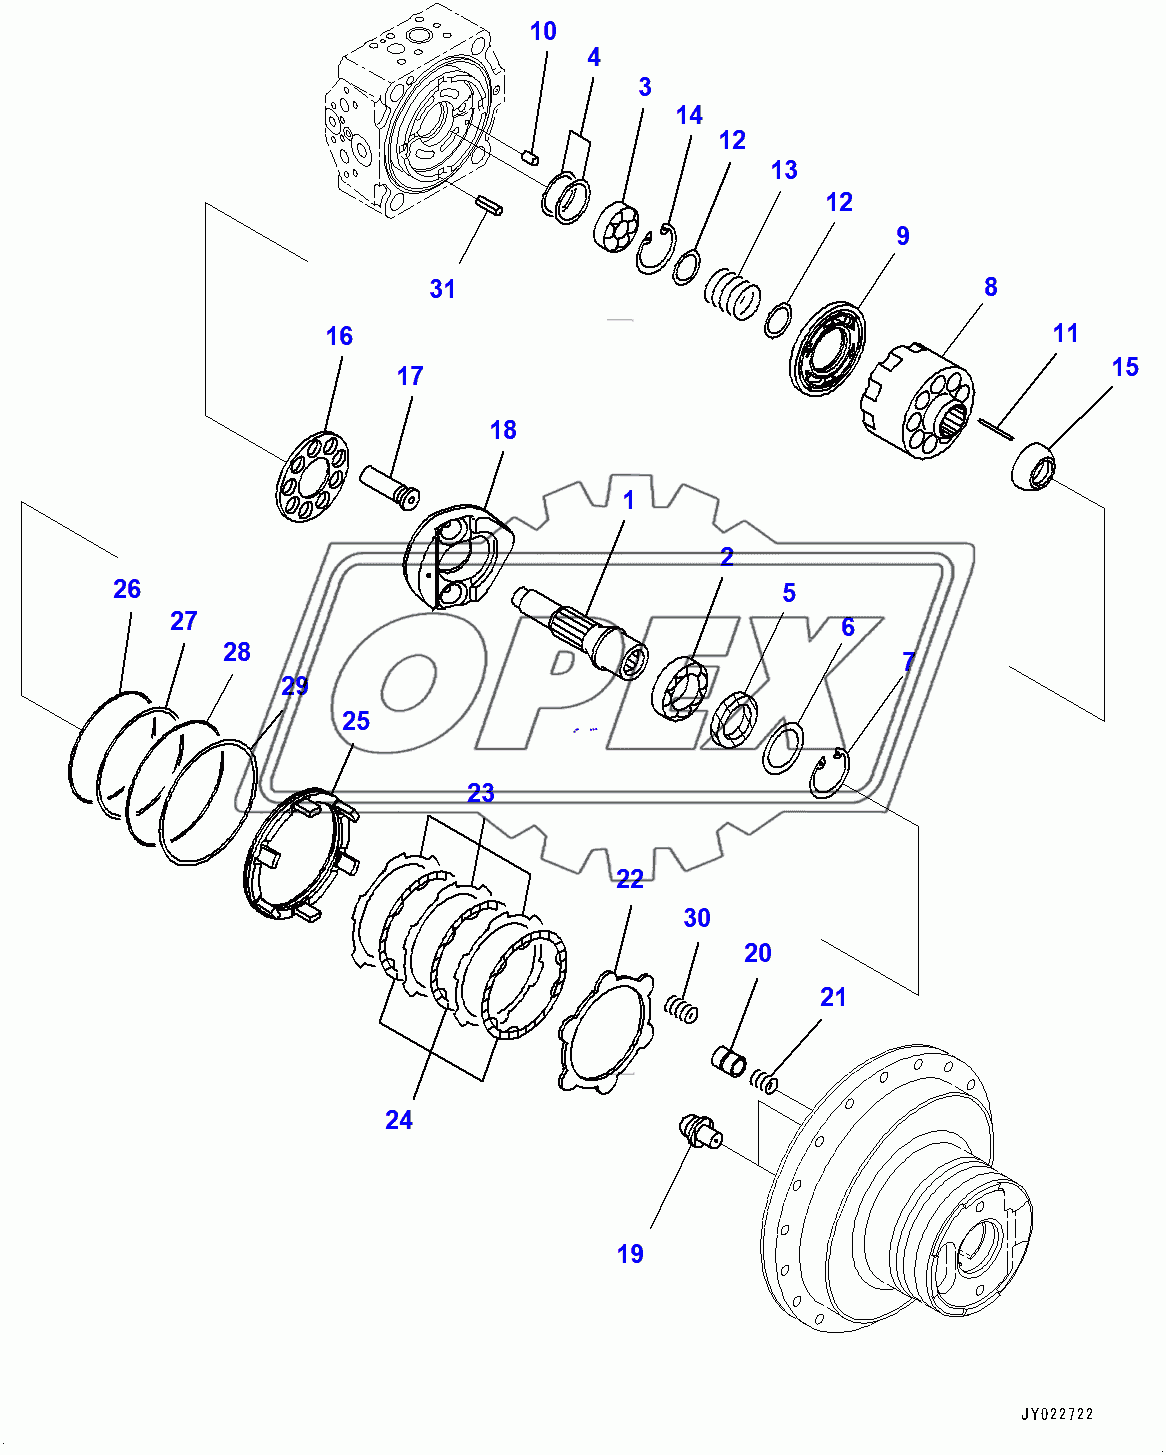  Travel Motor and Final Drive, Travel Motor, L.H. (2/2) (400127-)